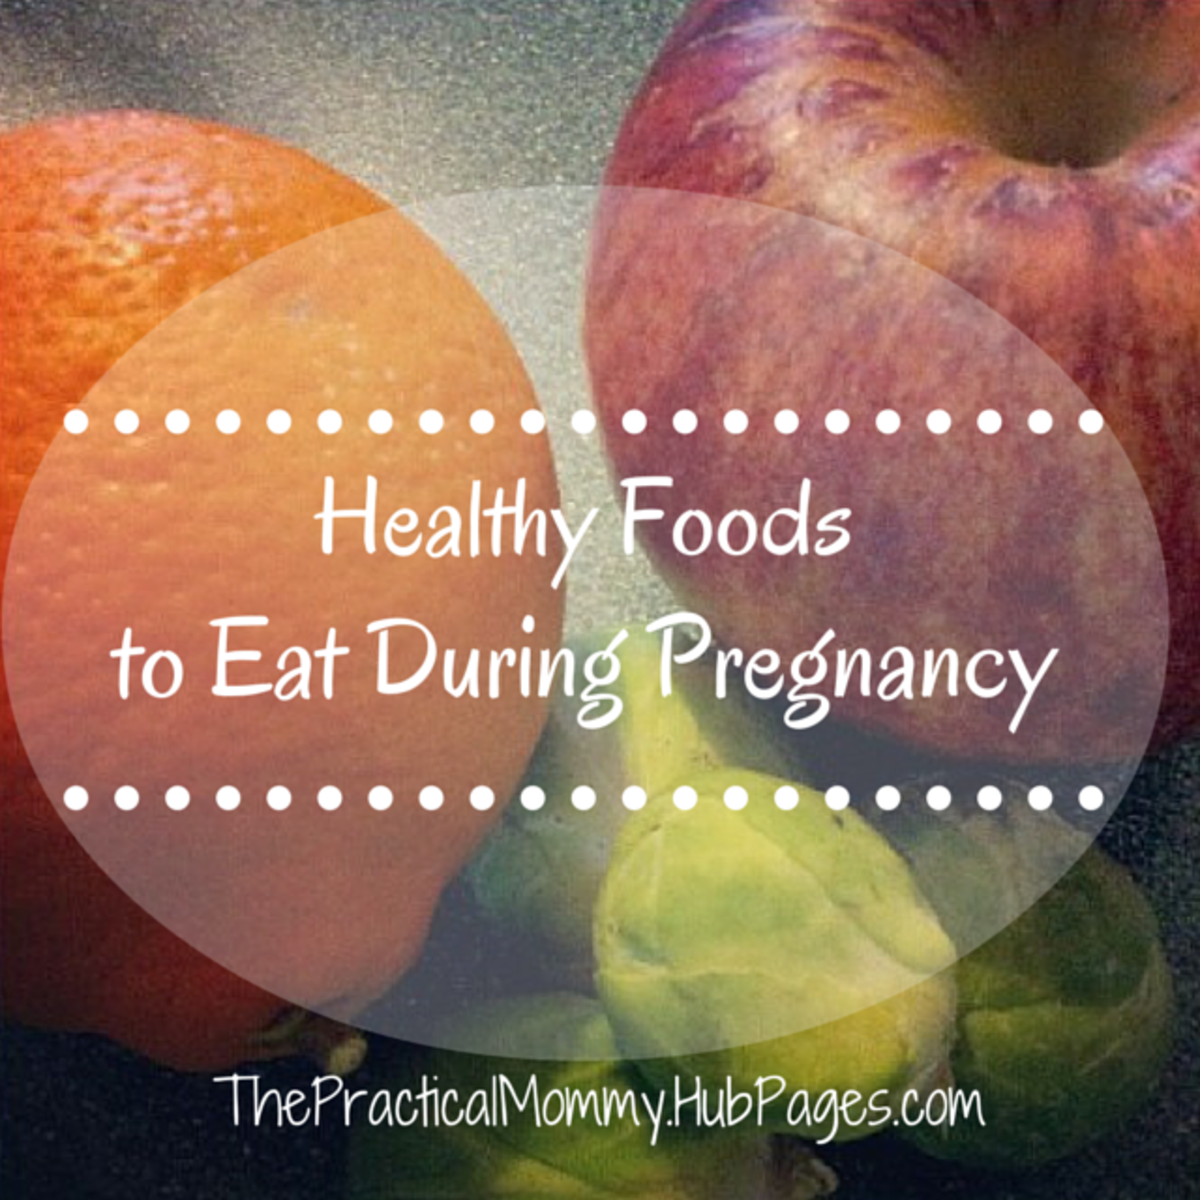 Fruits, veggies, greens.... Eat well during pregnancy! 